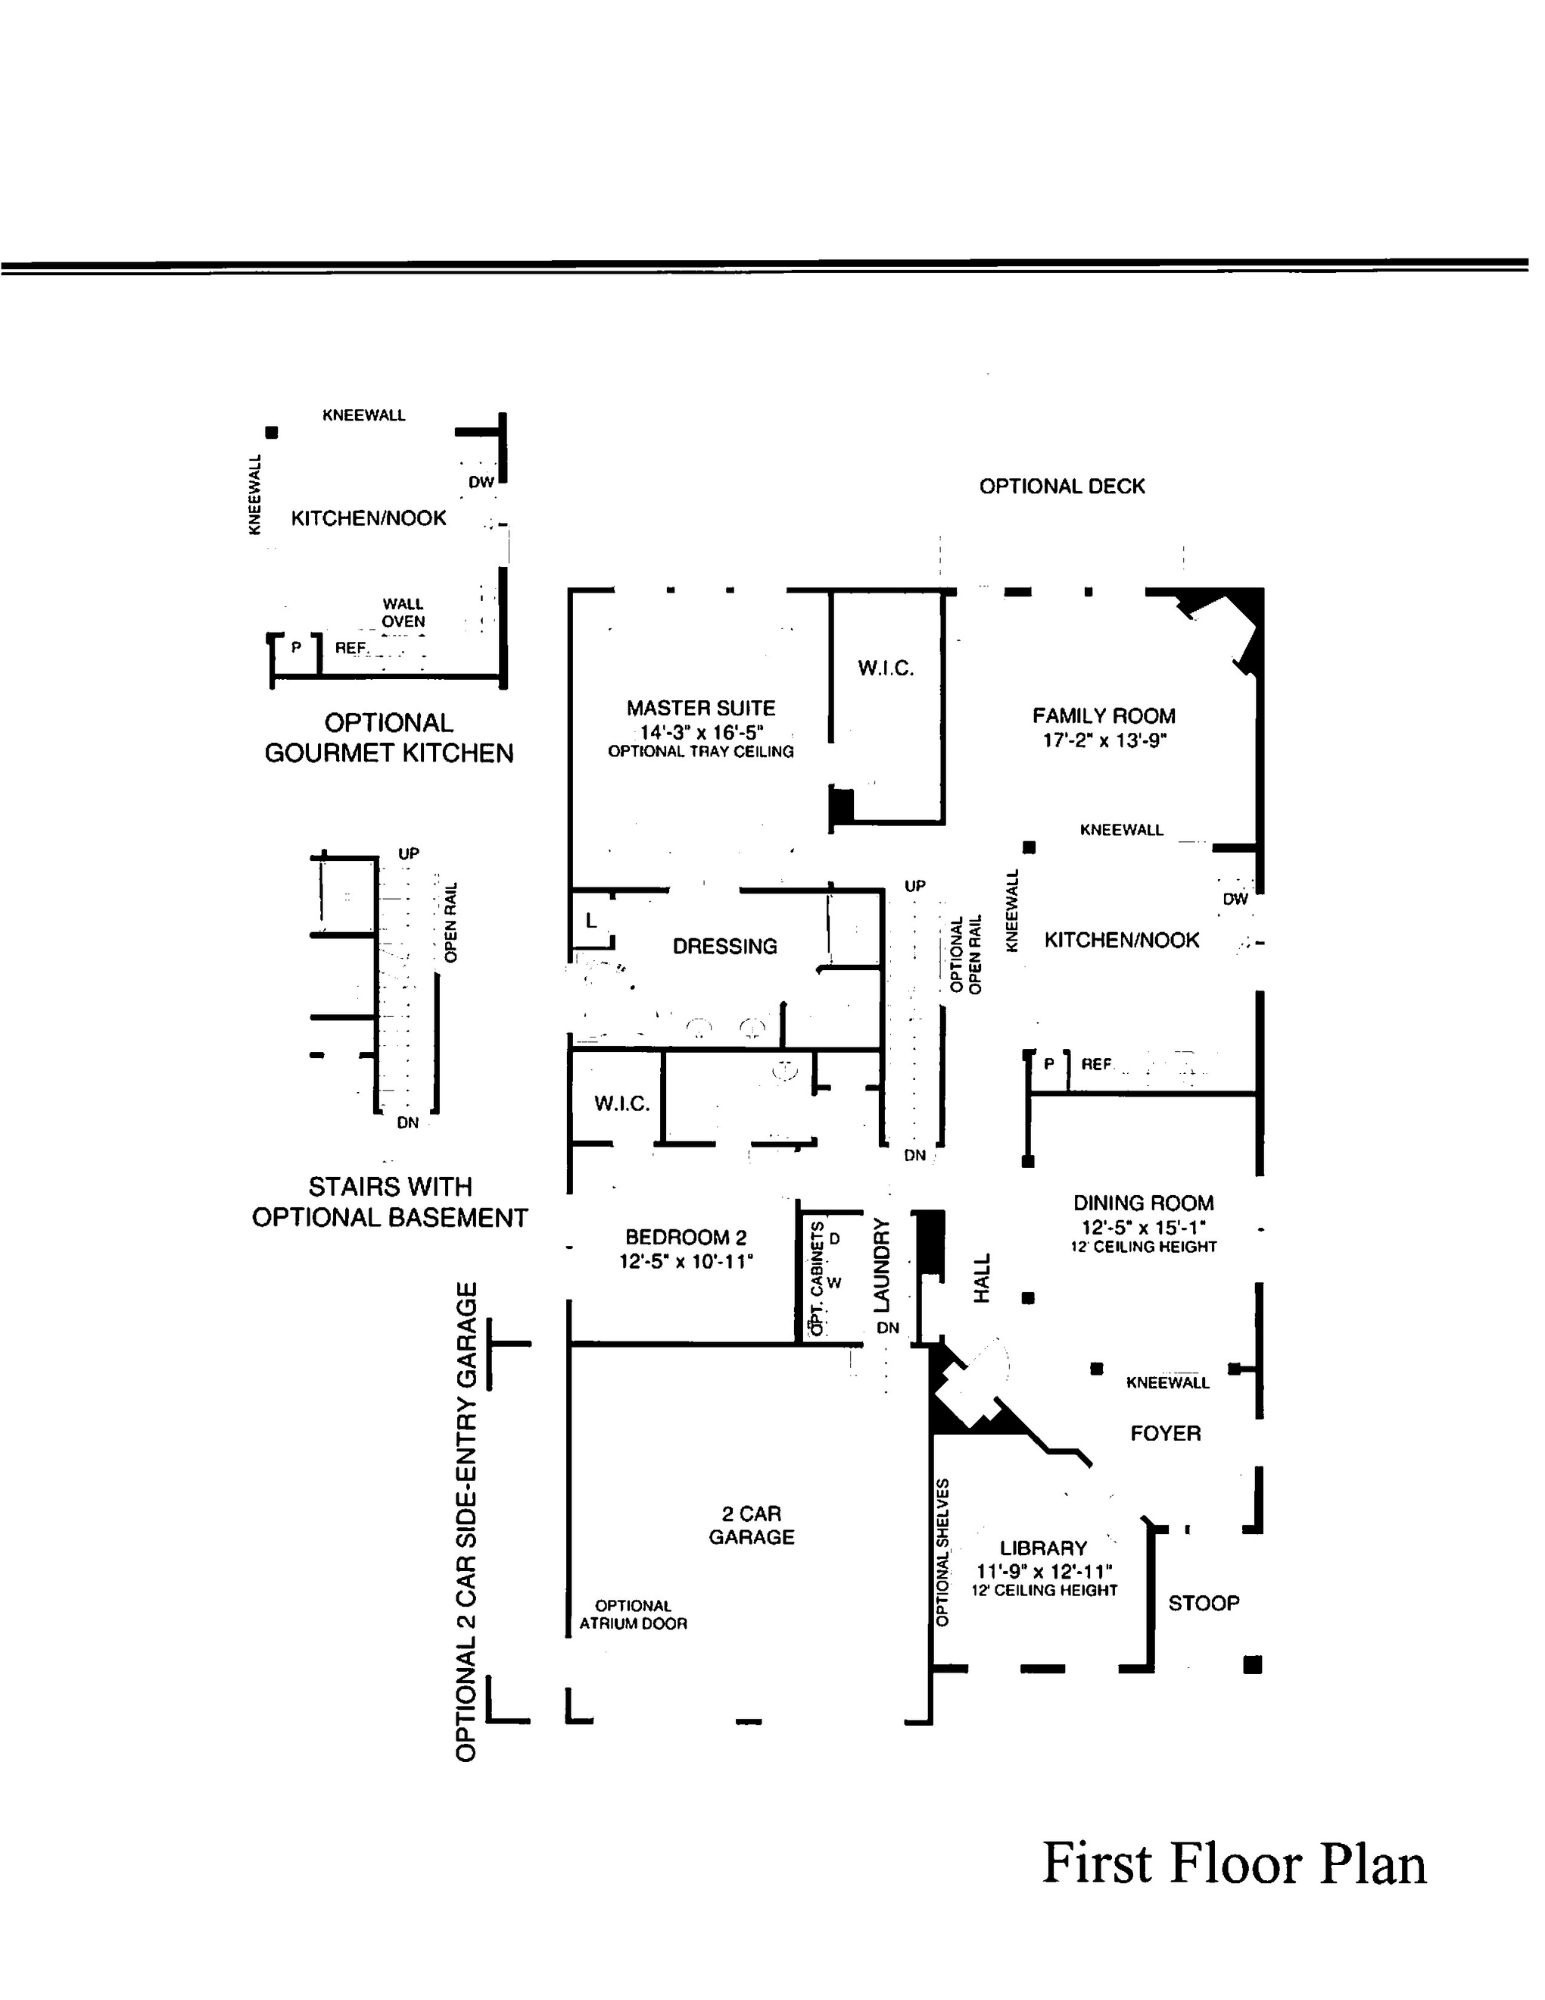 traditions at washington crossing newhall floor plan3